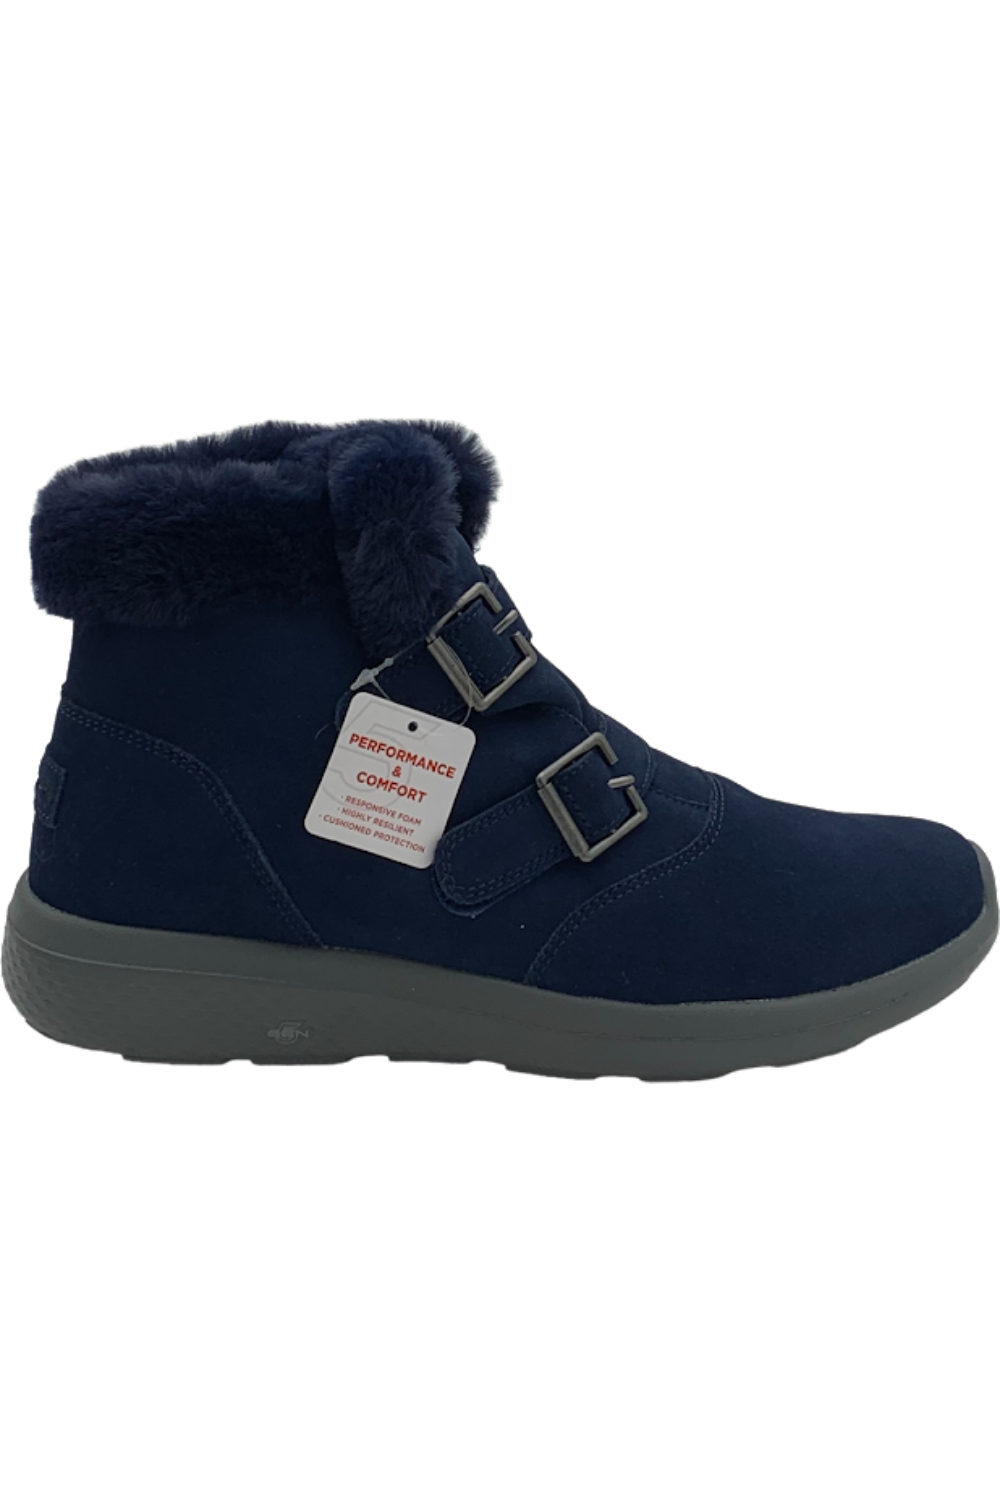 the City 2 Suede Boots Winter Fling Navy | eBay